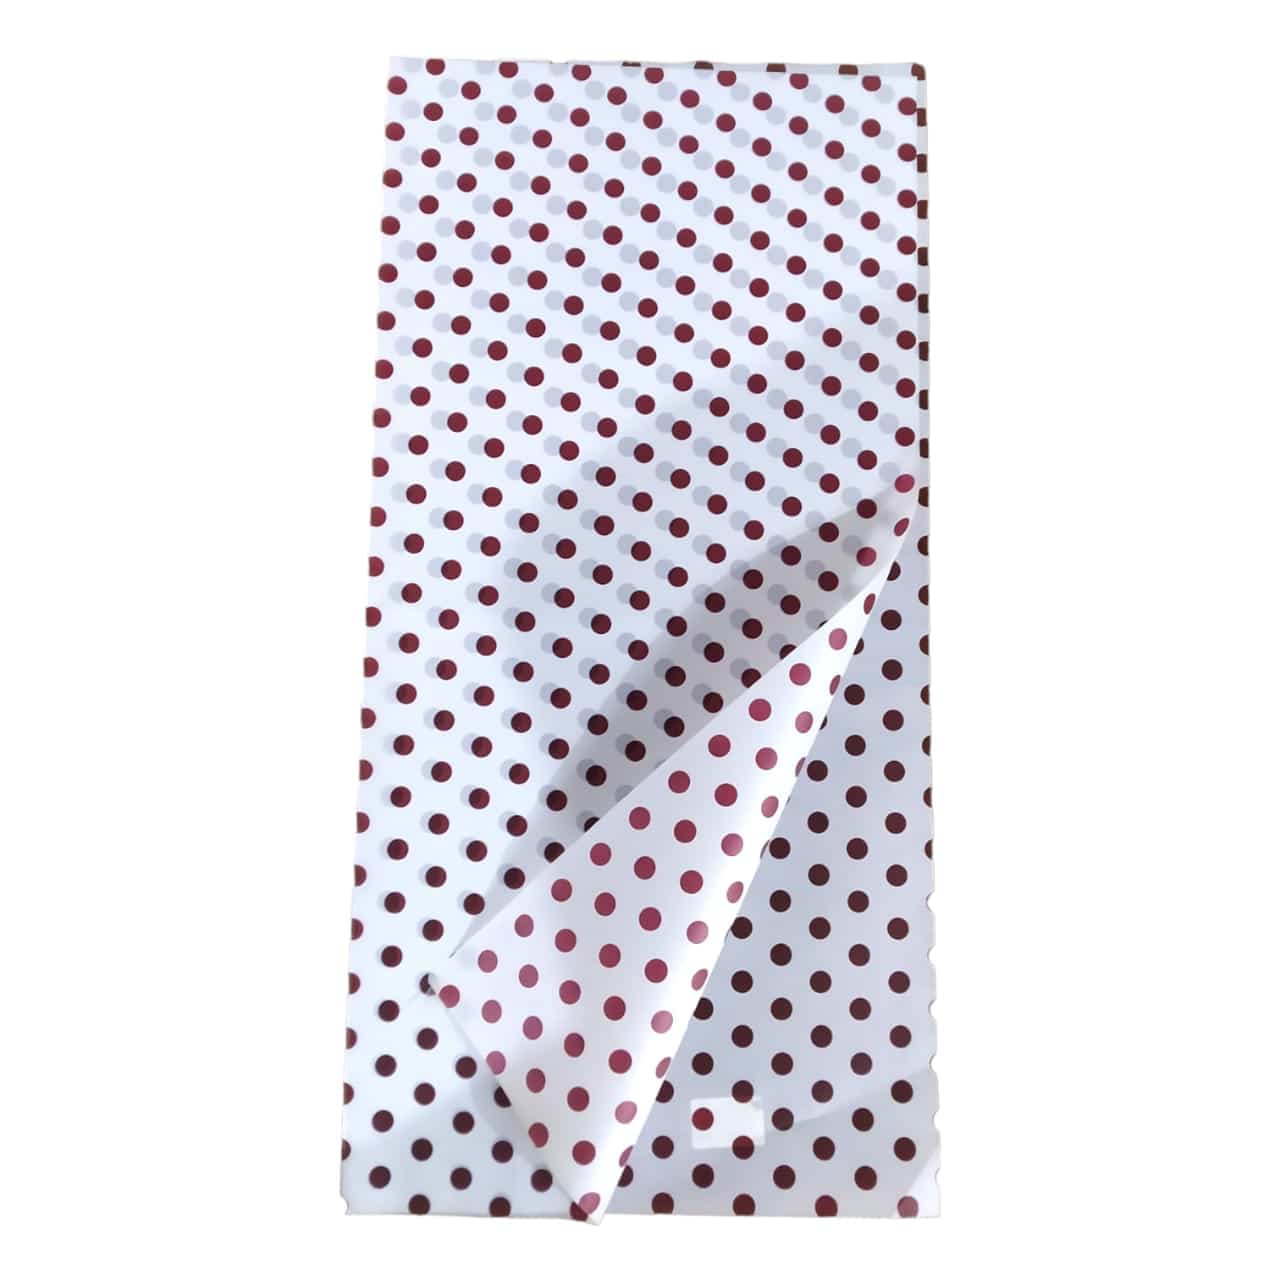 Ravrai Craft - Mumbai Branch Wrapping Paper WHITE Polka Dots Wrapping Paper - Plastic Material, 58x58cm, Pack of 1 Sheet